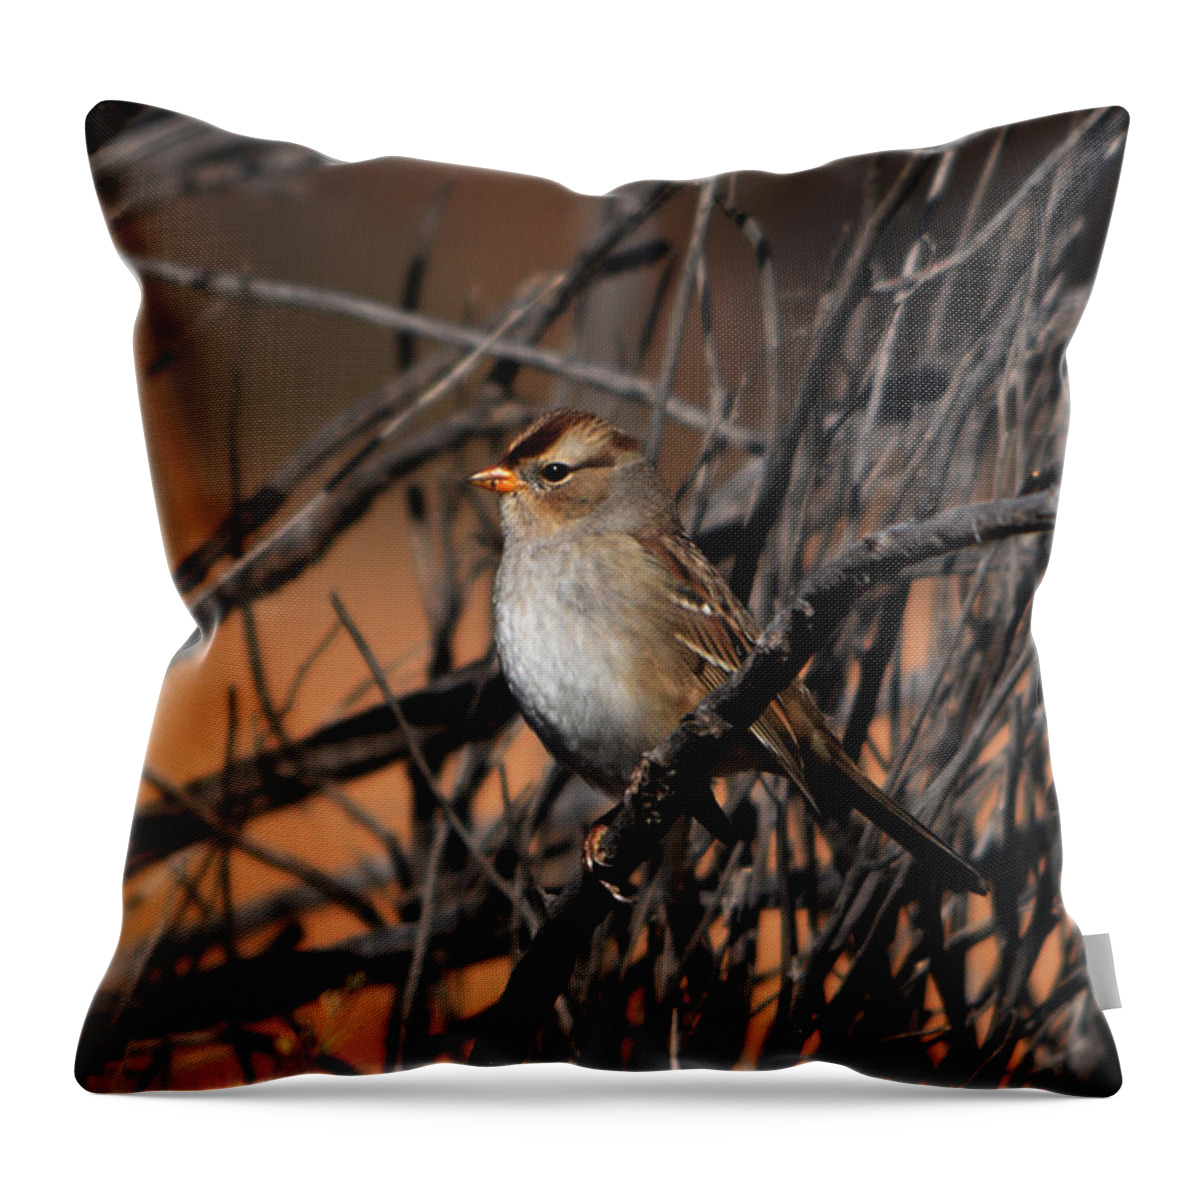 American Tree Sparrow Throw Pillow featuring the photograph American Tree Sparrow by John Greco